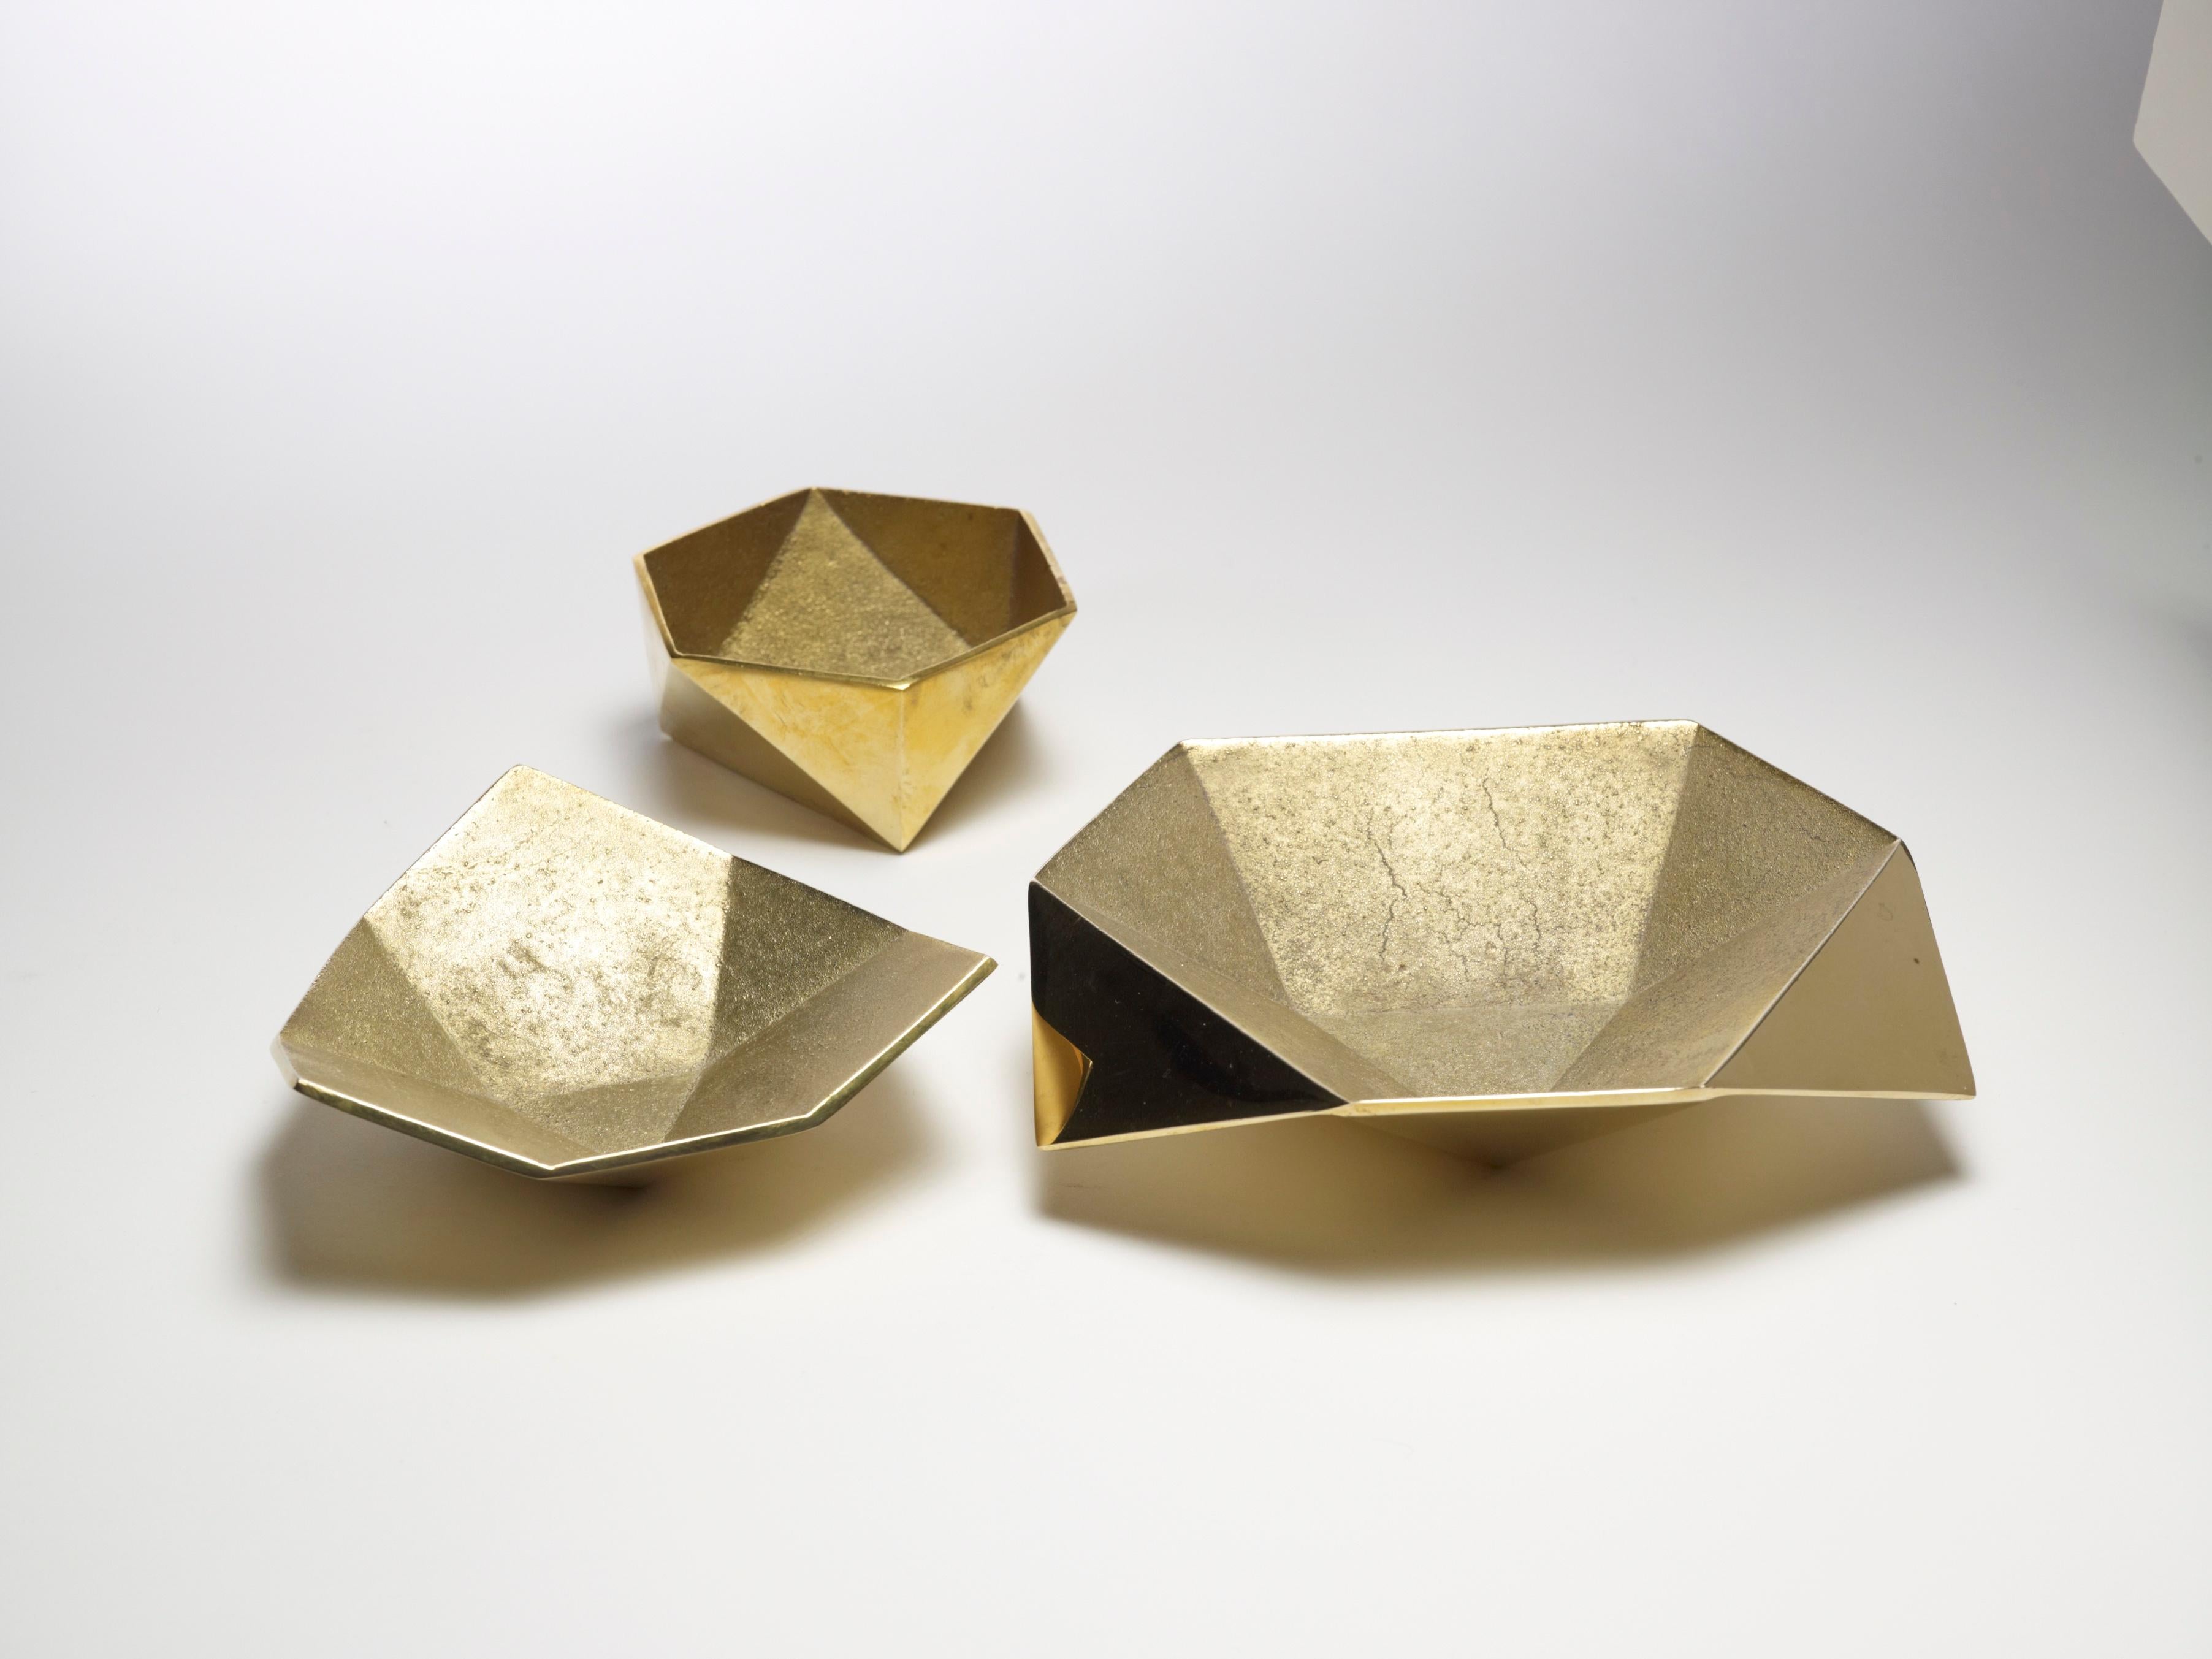 These cast metal vessels are indebted to origami forms. Available in brass and aluminum. Set of three.

Founded in 2011, AKMD developed out of a thirteen-year friendship and design collaboration between Ayush Kasliwal and Mike Dreeben.

The two met